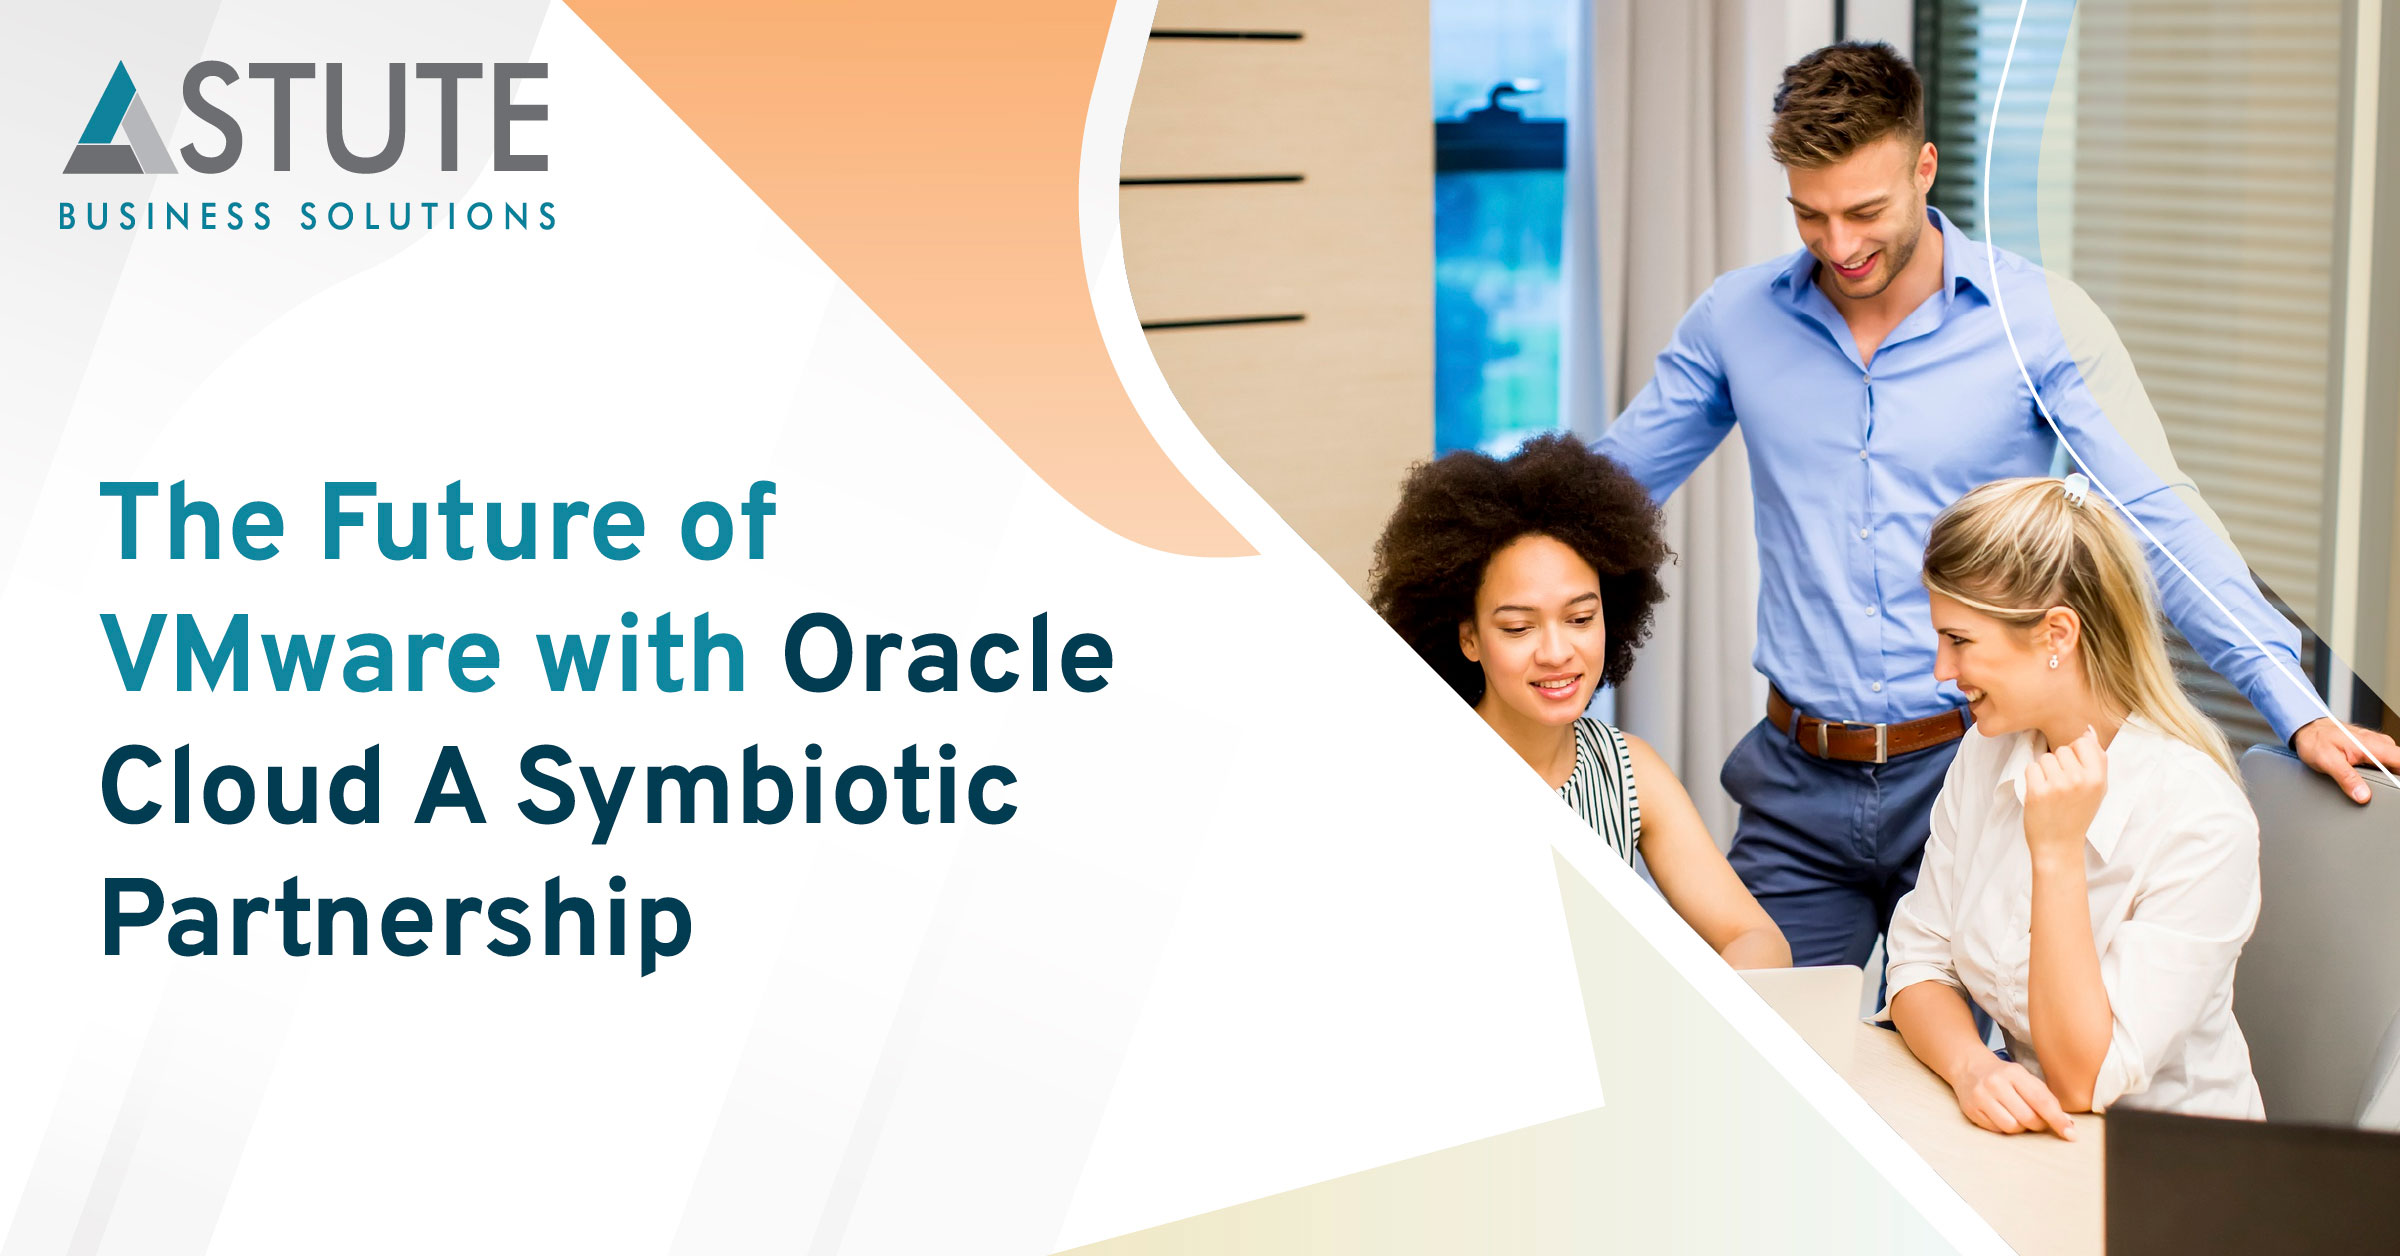 The Future of VMware with Oracle Cloud: A Symbiotic Partnership